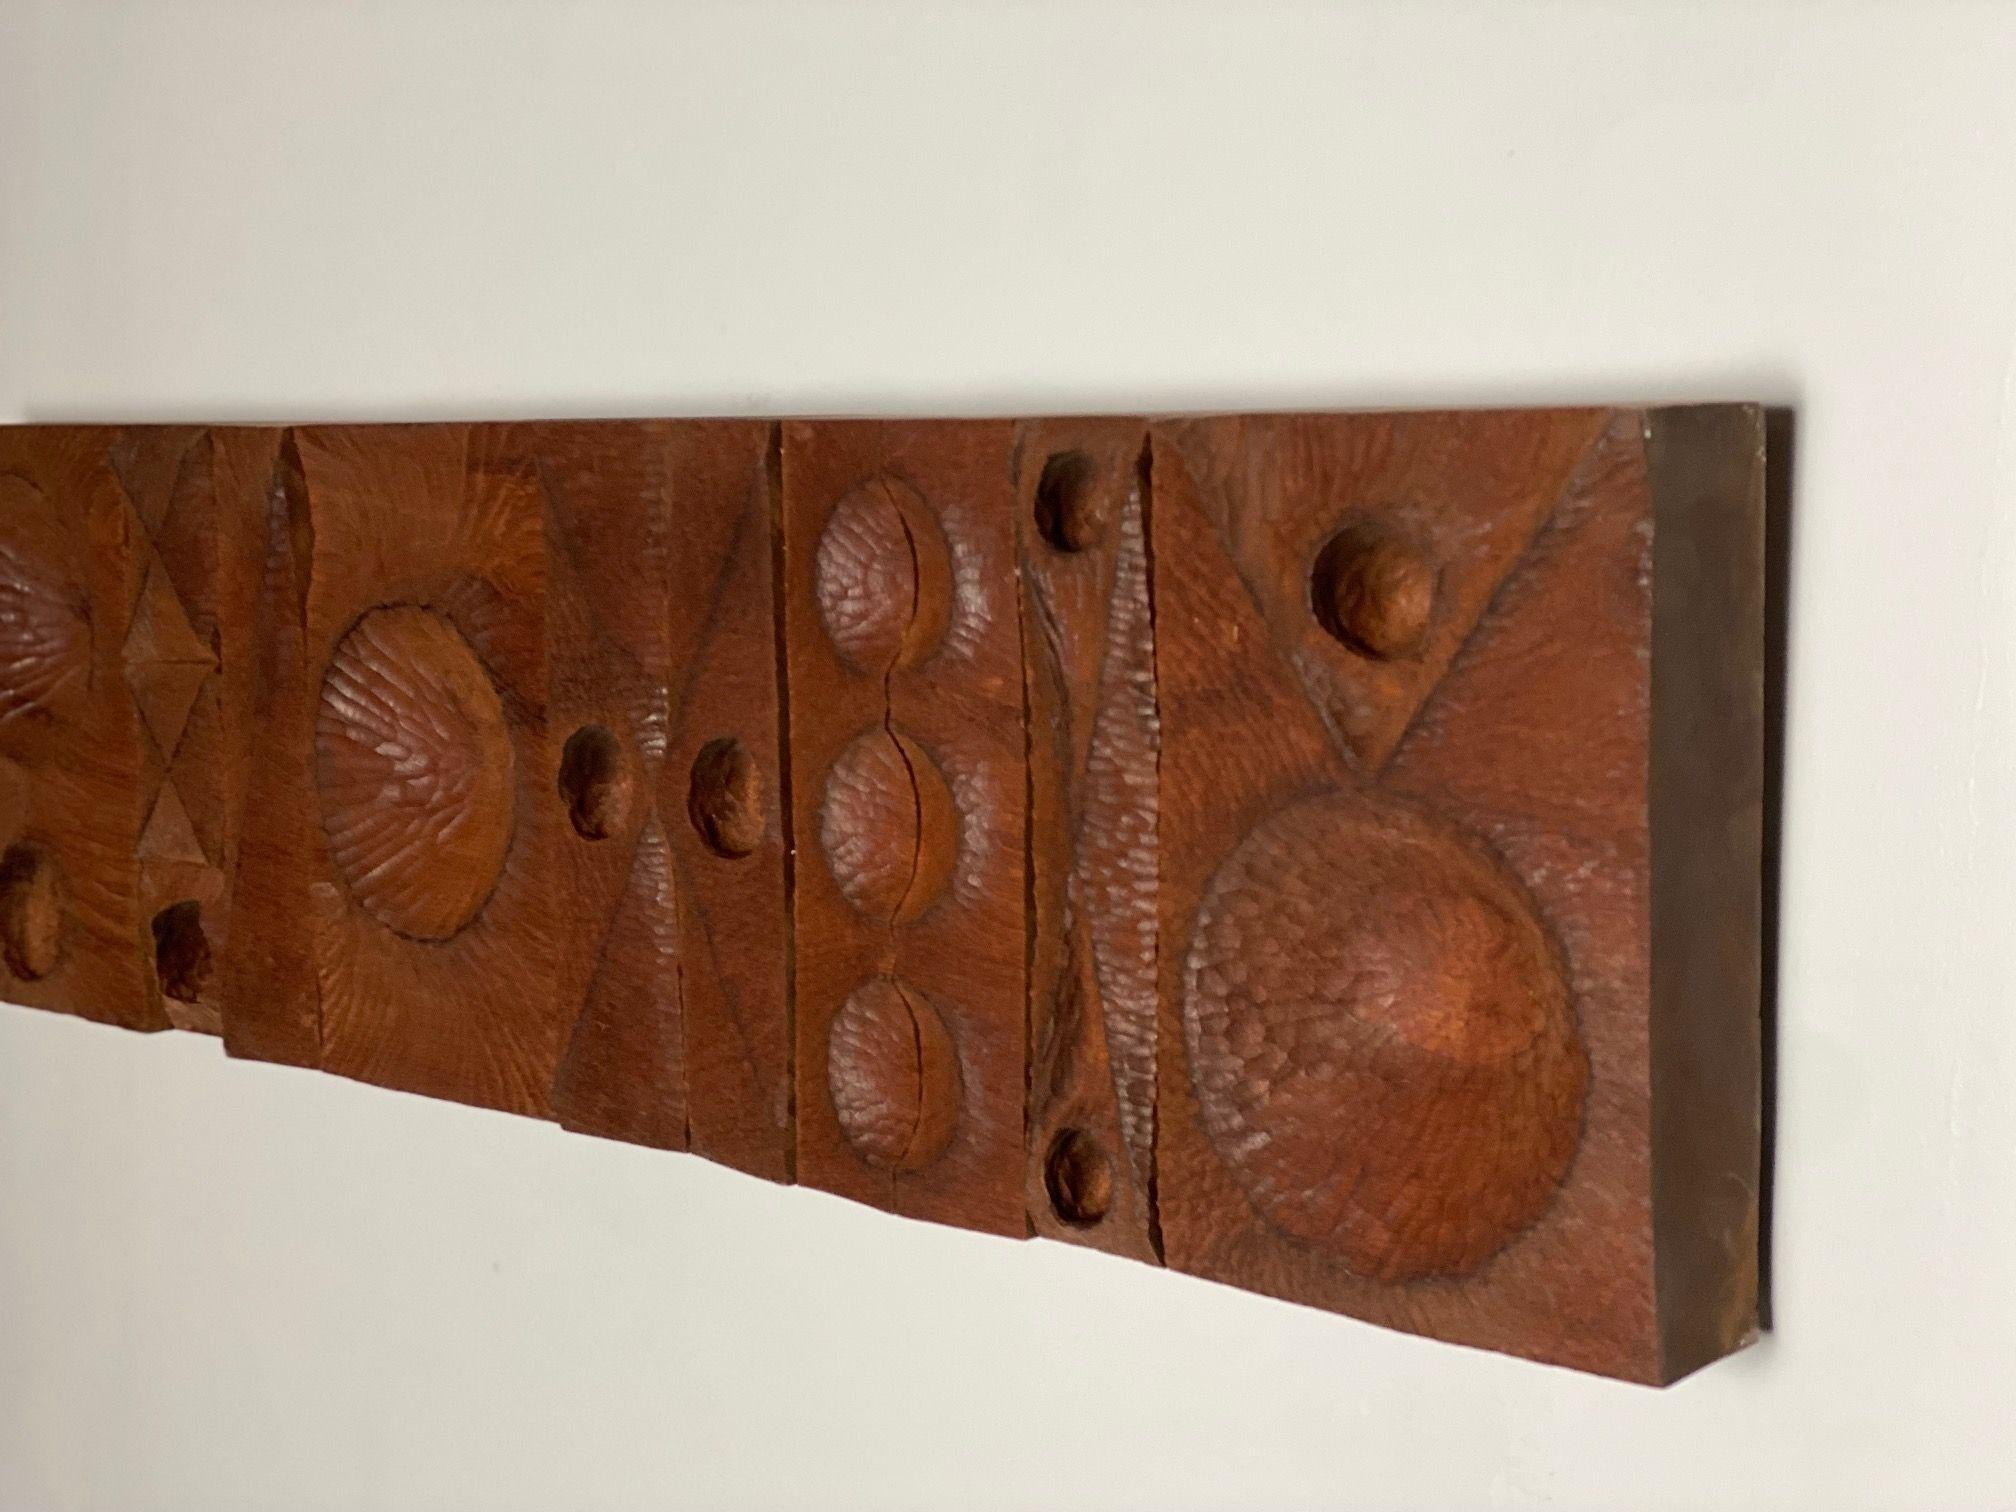 Large mahogany chip carved sculpture by Ohio Craftsman Michael Rozell.